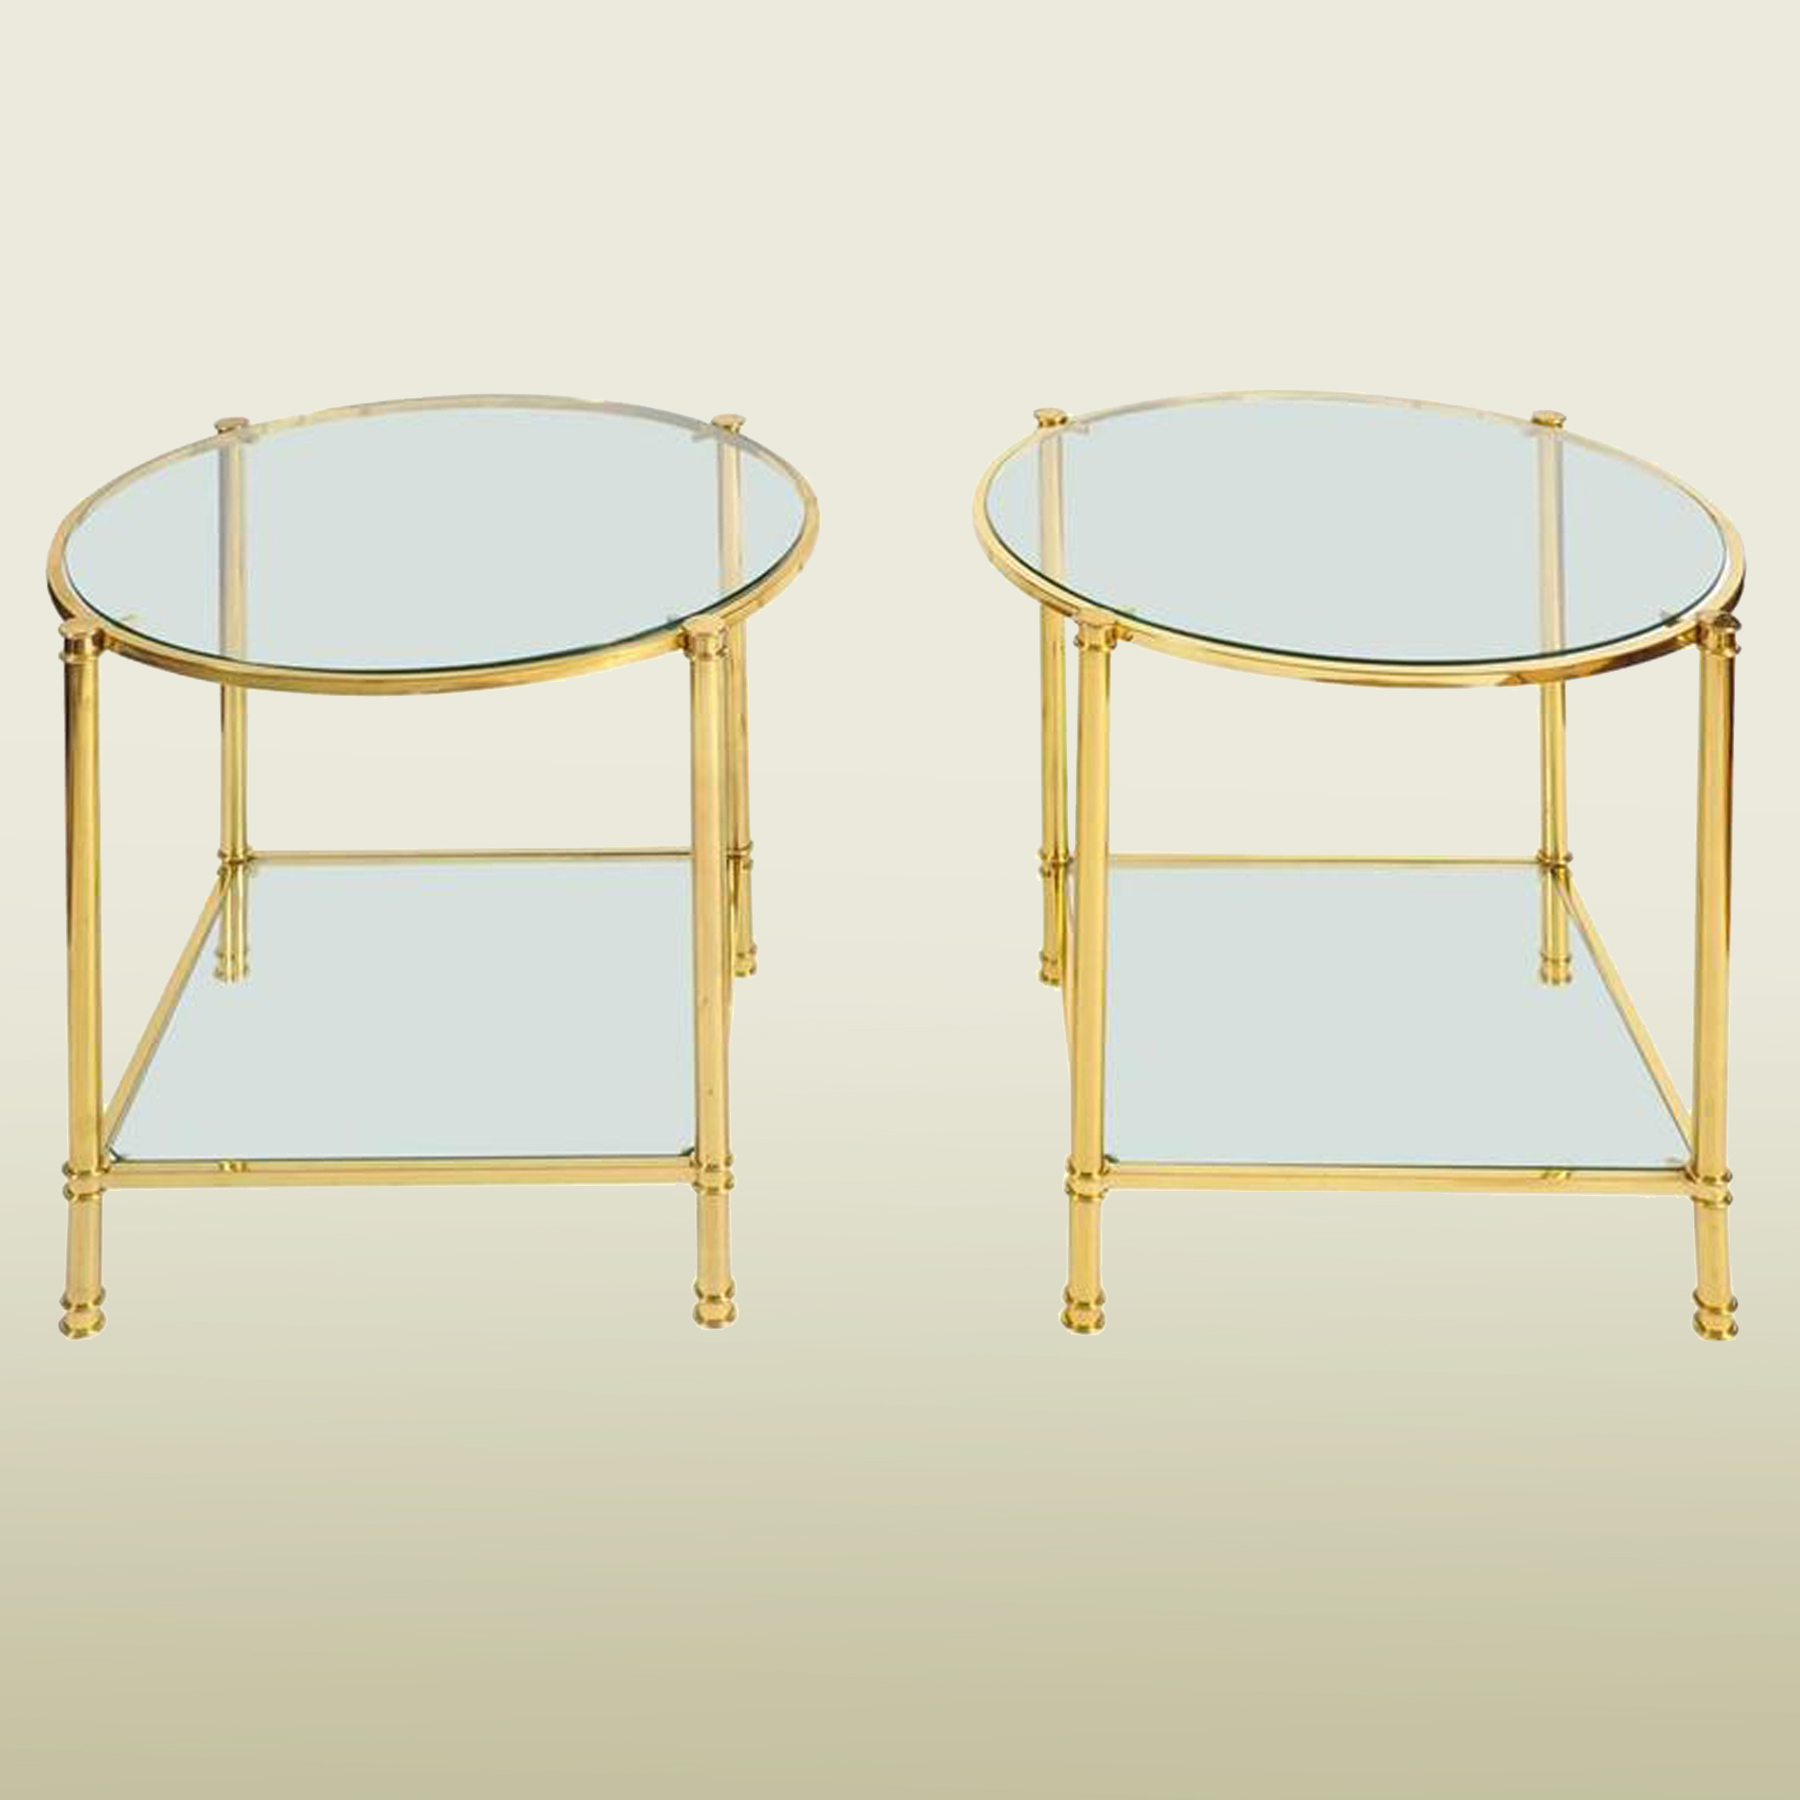 French Tables